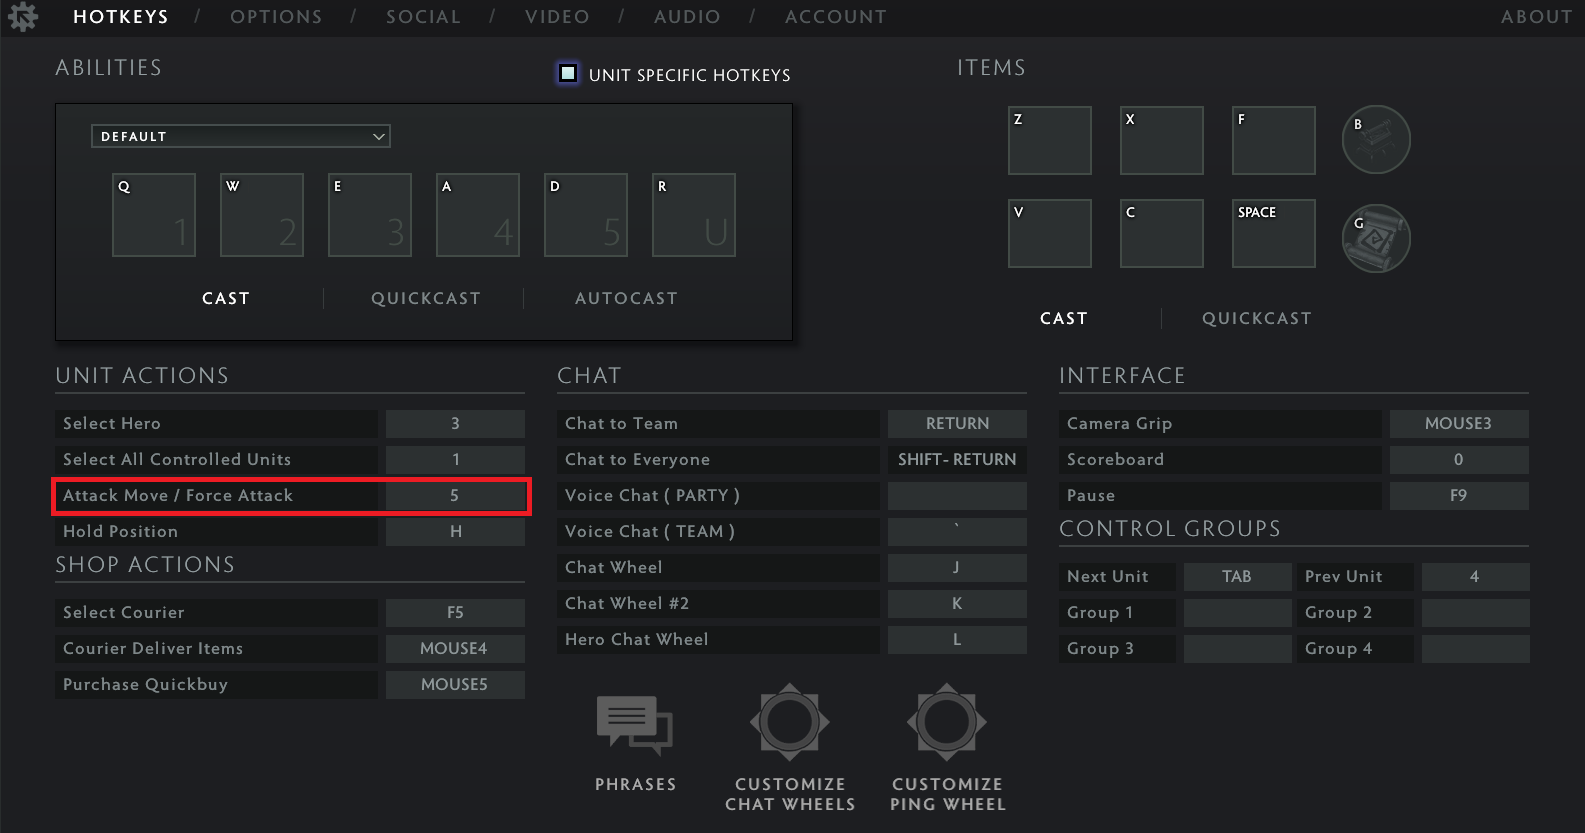 This image portrays a screengrab of the settings screen in DOTA 2.